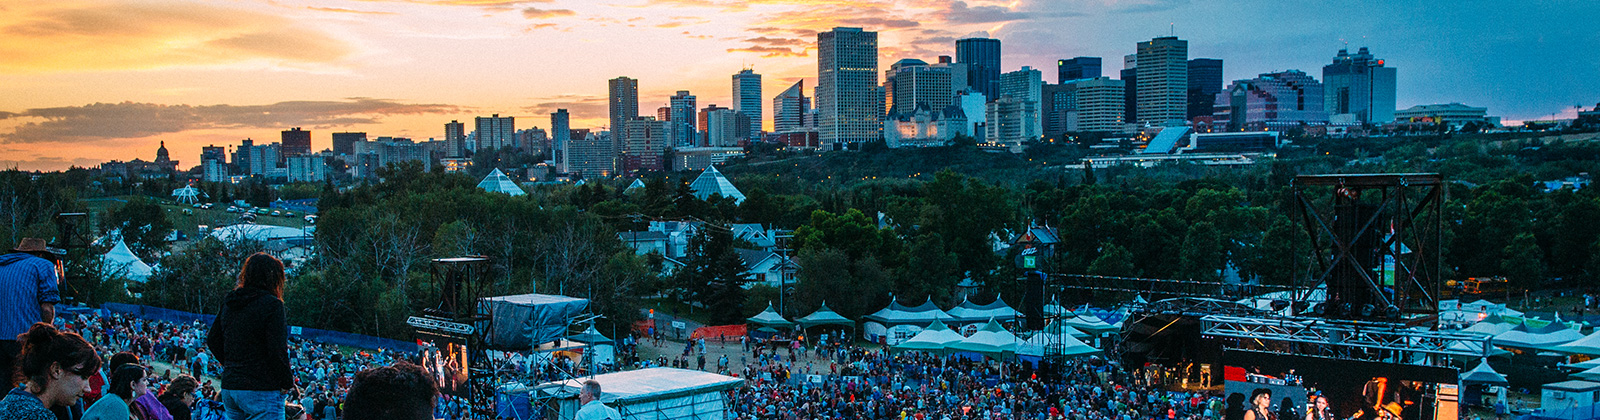 a view of the edmonton skyline at sunset above the crowd and tents at the edmonton folk festival